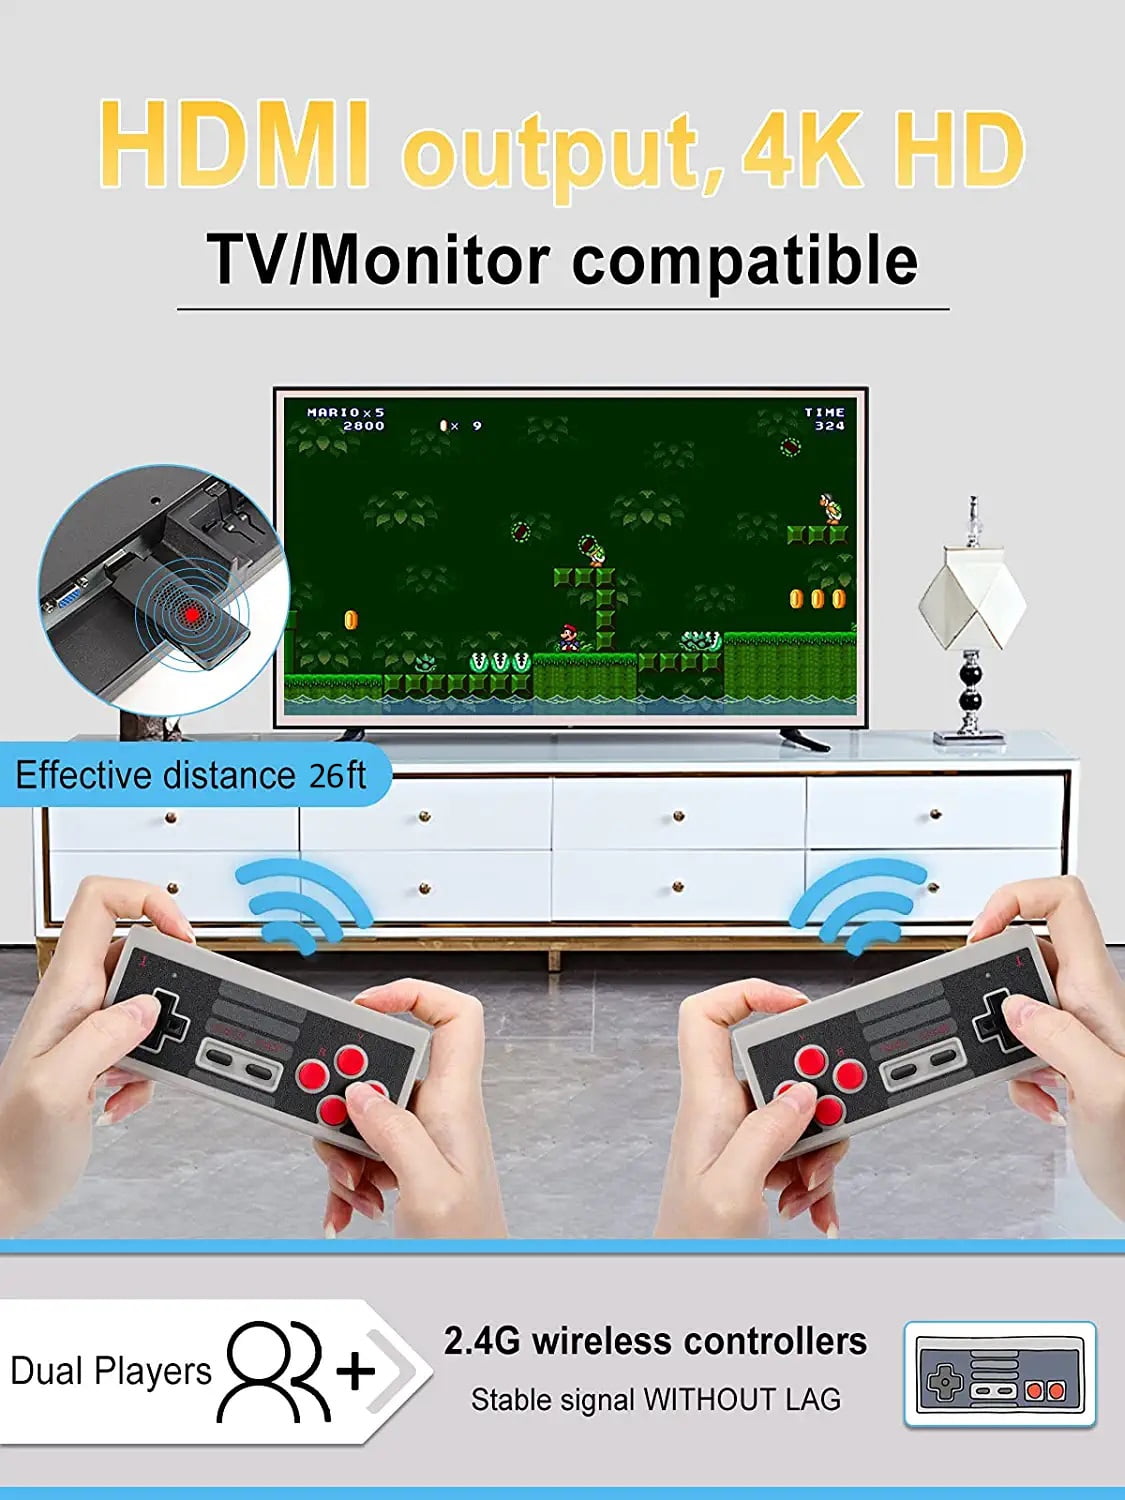 Retro Classic Mini Game Console Childhood Game Consoles Built-in 620 Game Dual Control 8-Bit Handheld Game Player for TV Video Bring Happy Childhood Memories